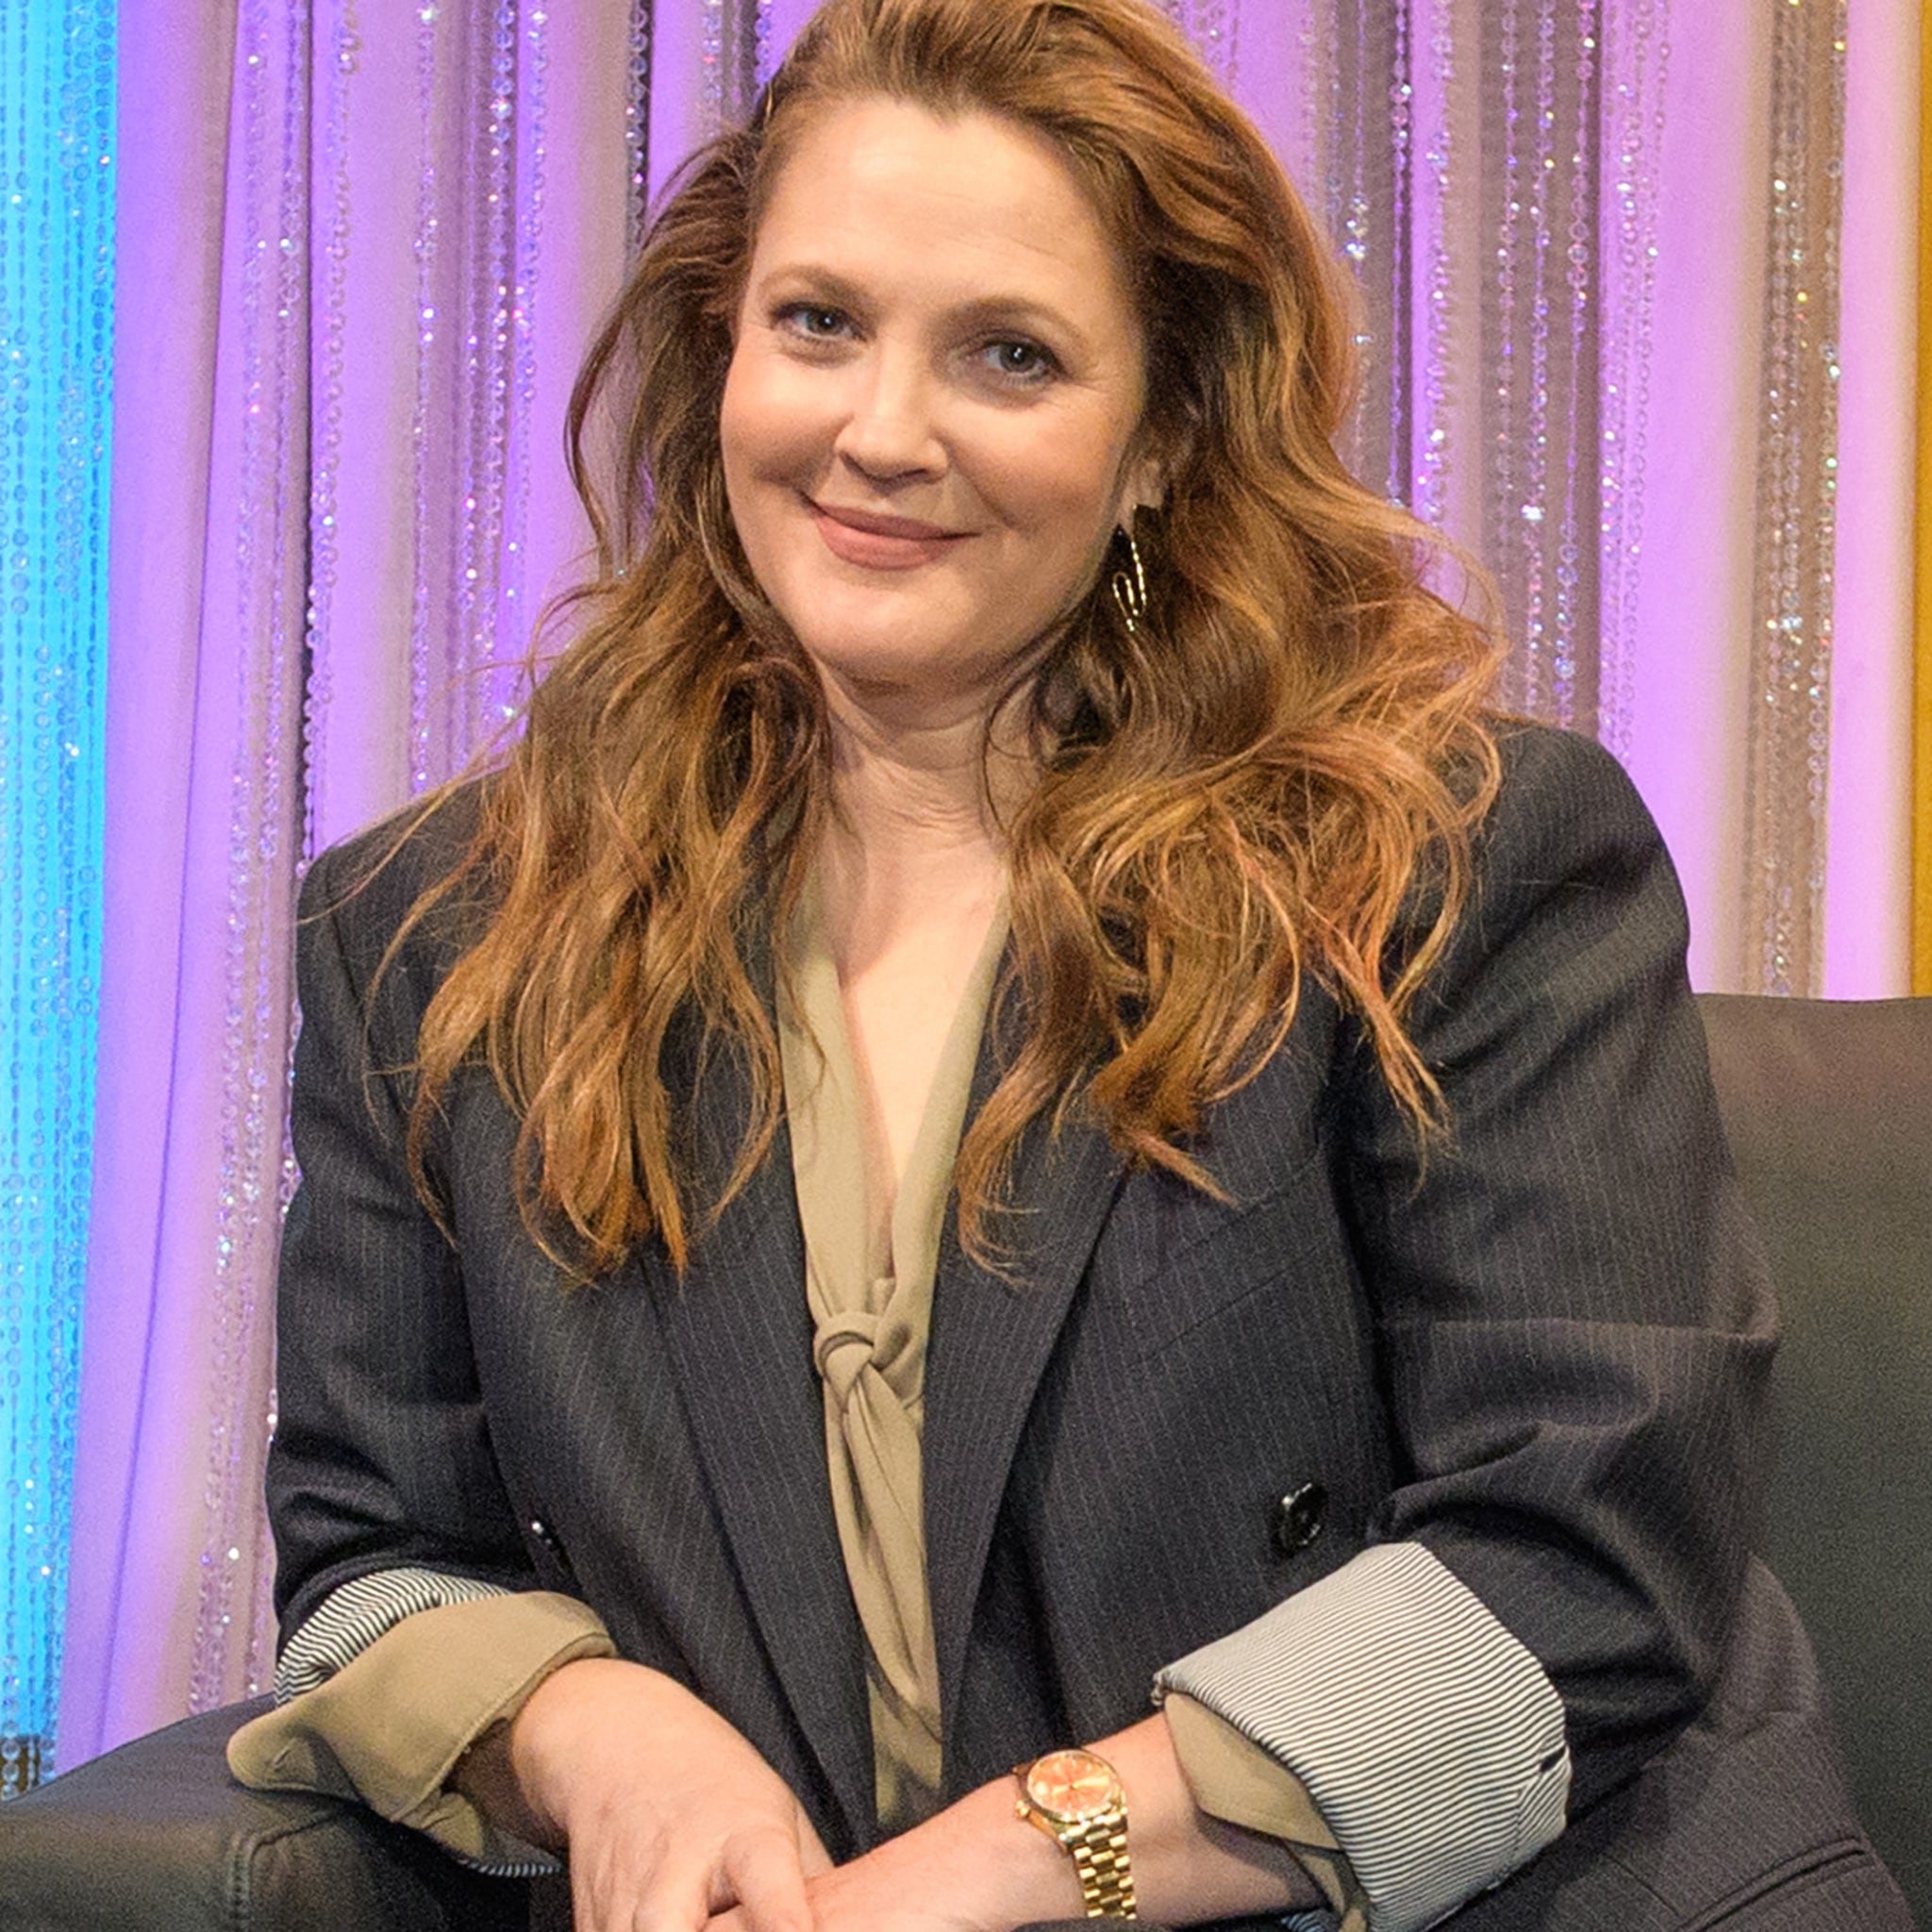 Drew Barrymore Plays Dating Game on Howard Stern Threesome, Fallon and Frisky Cameron Diaz?!